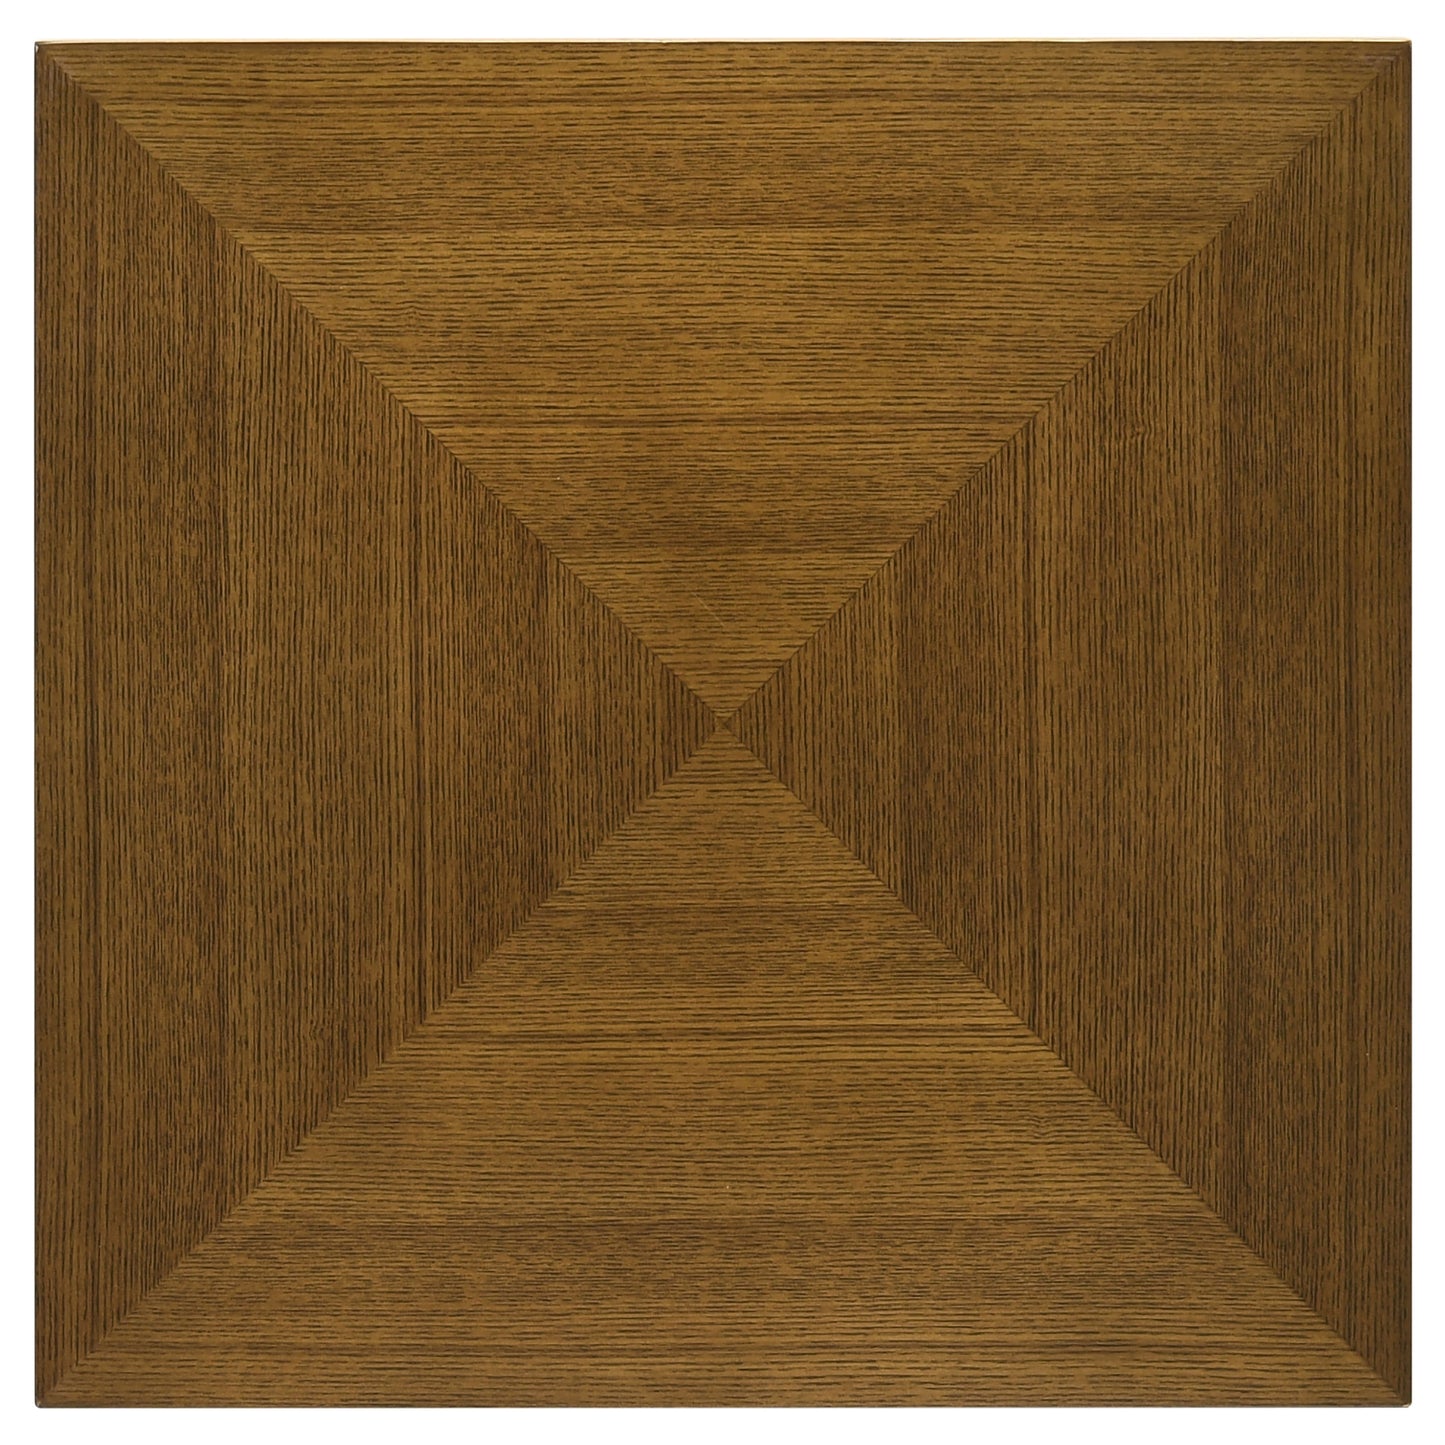 Westerly Square Wood End Table with Diamond Parquet Walnut